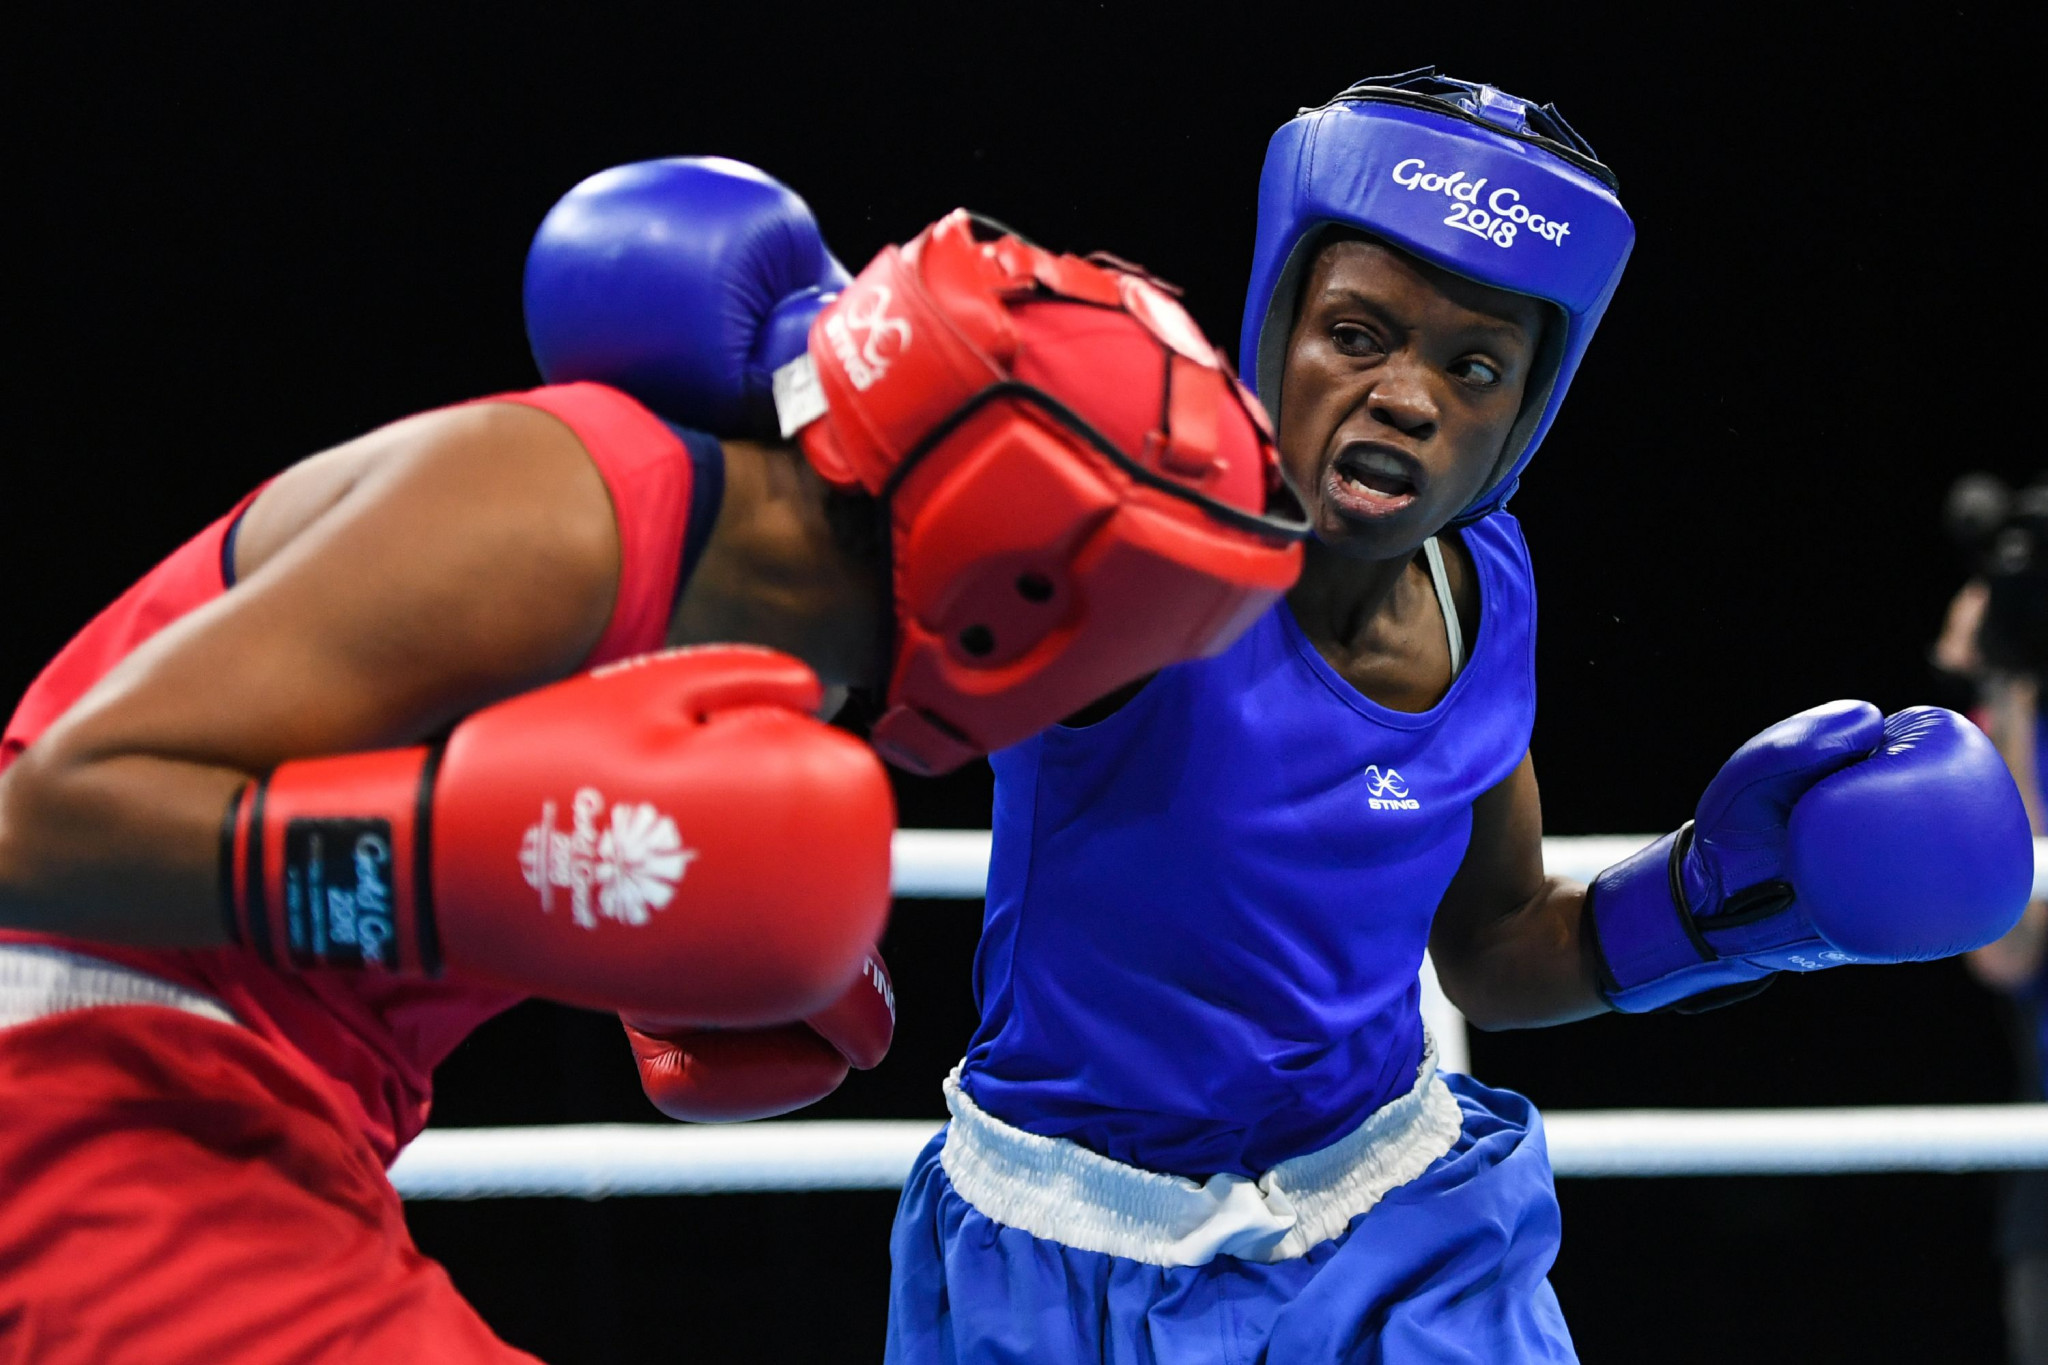 Commonwealth medallist among Kenyans to receive Olympic scholarships